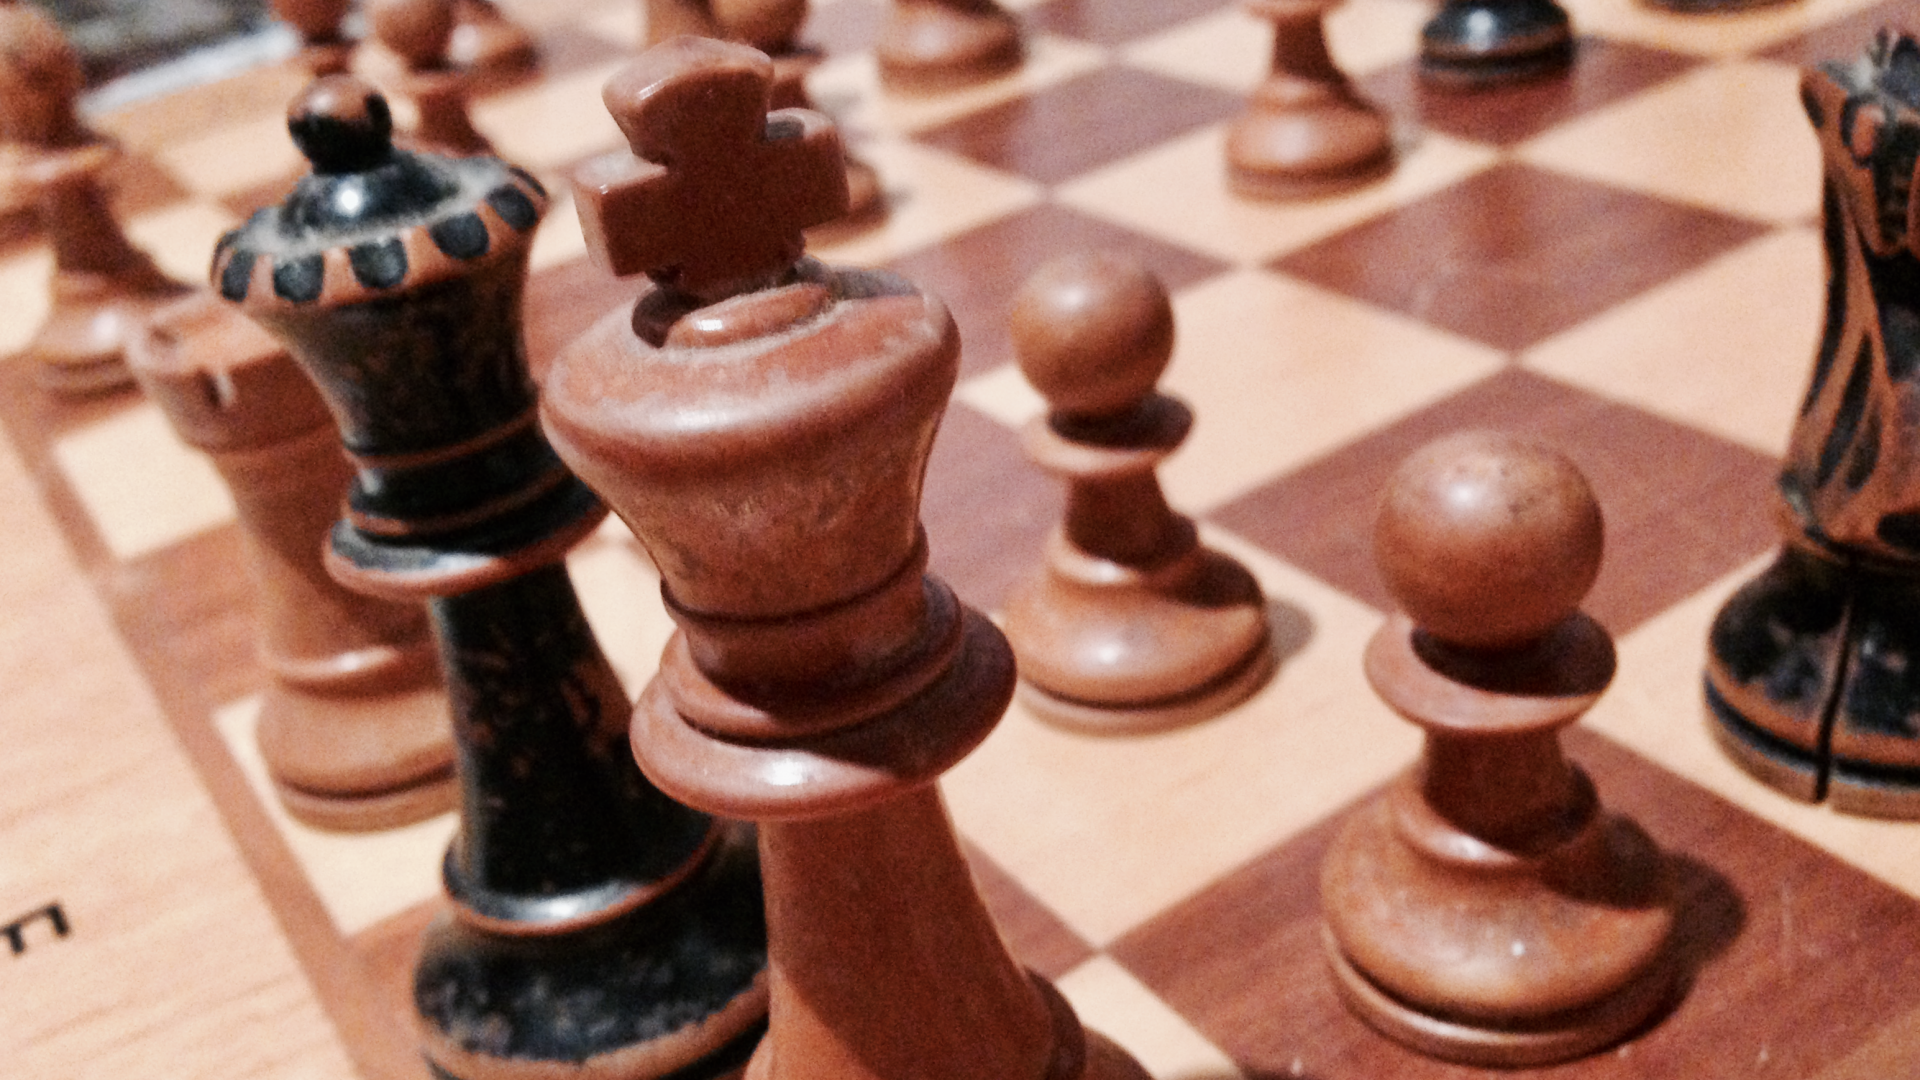 pgn chess games database